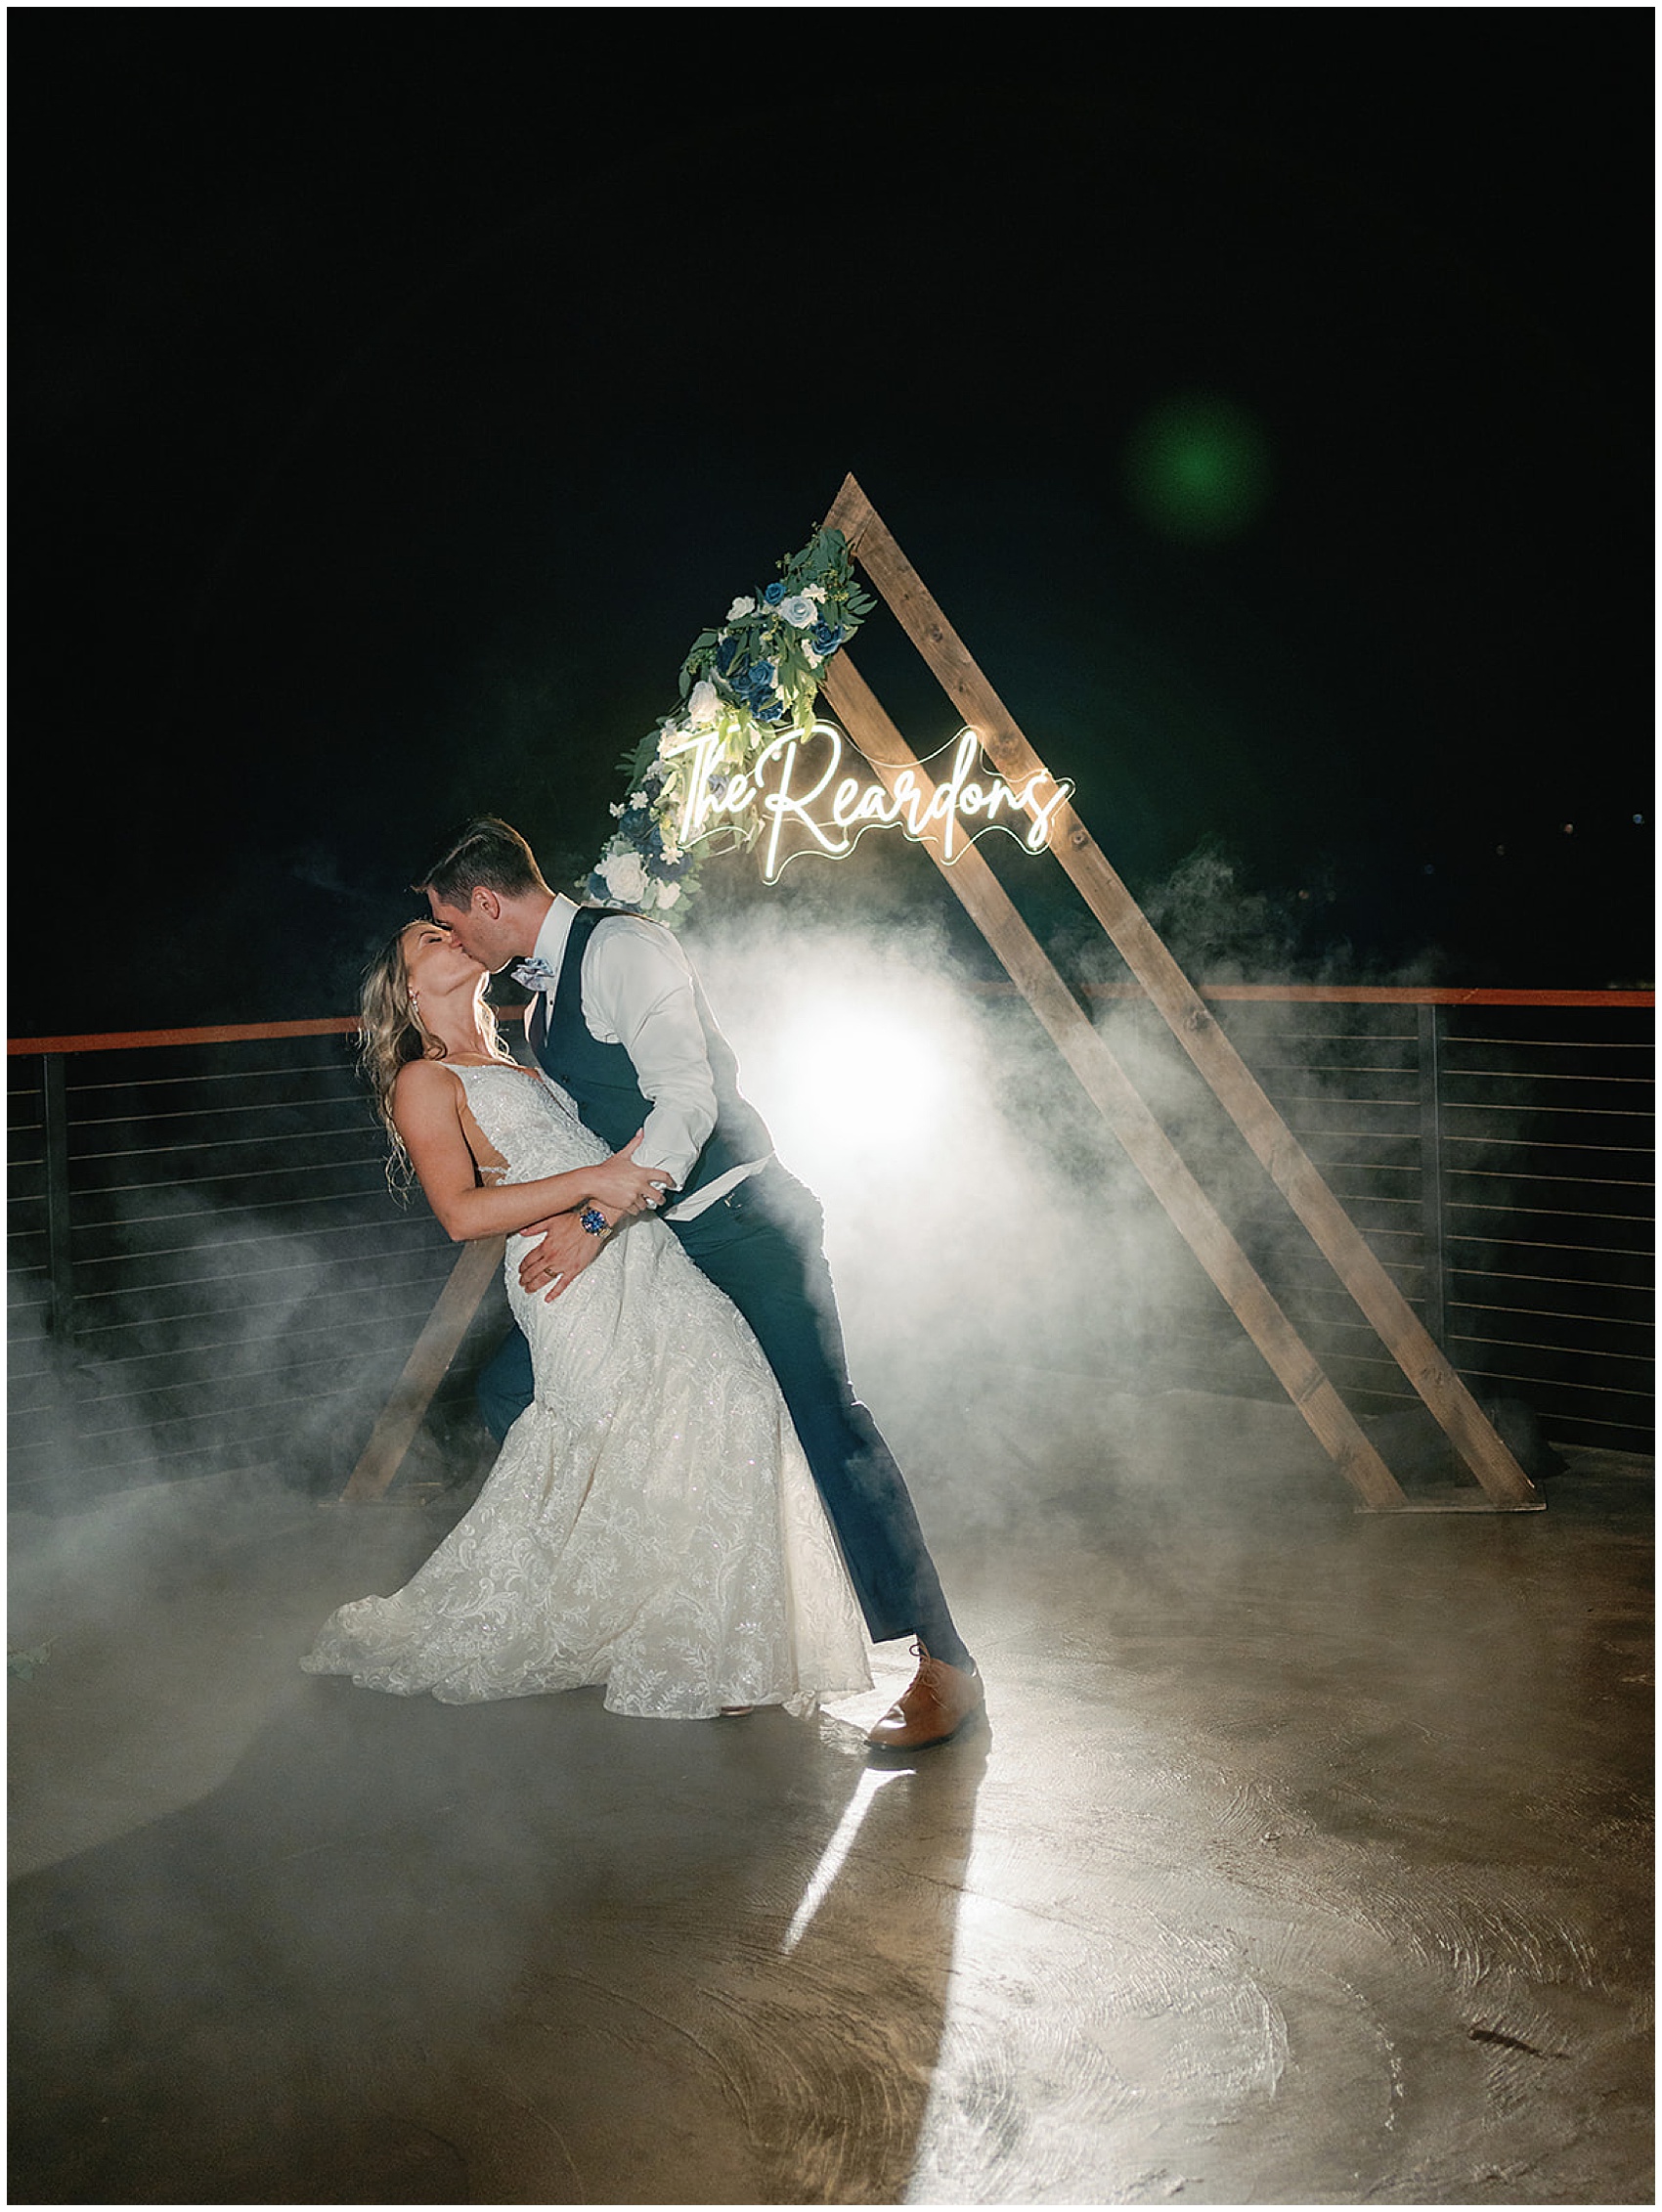 A groom dips and kisses his bride in front of a custom wood triangle arbor with a smoke machine